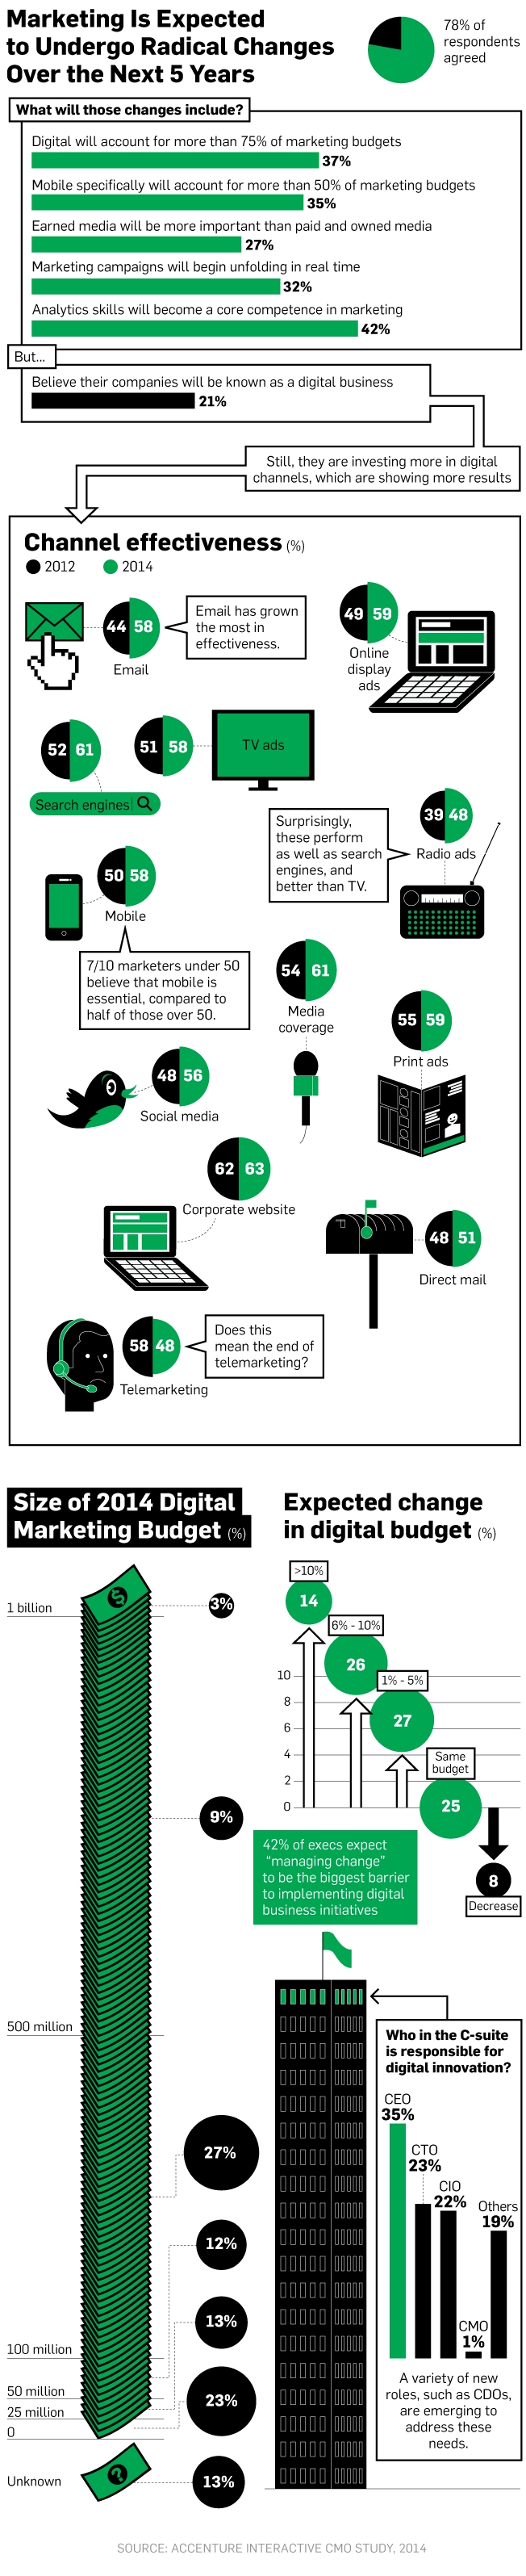 CMOs Are Preparing for Digital to Grow to 75% of Marketing Budgets